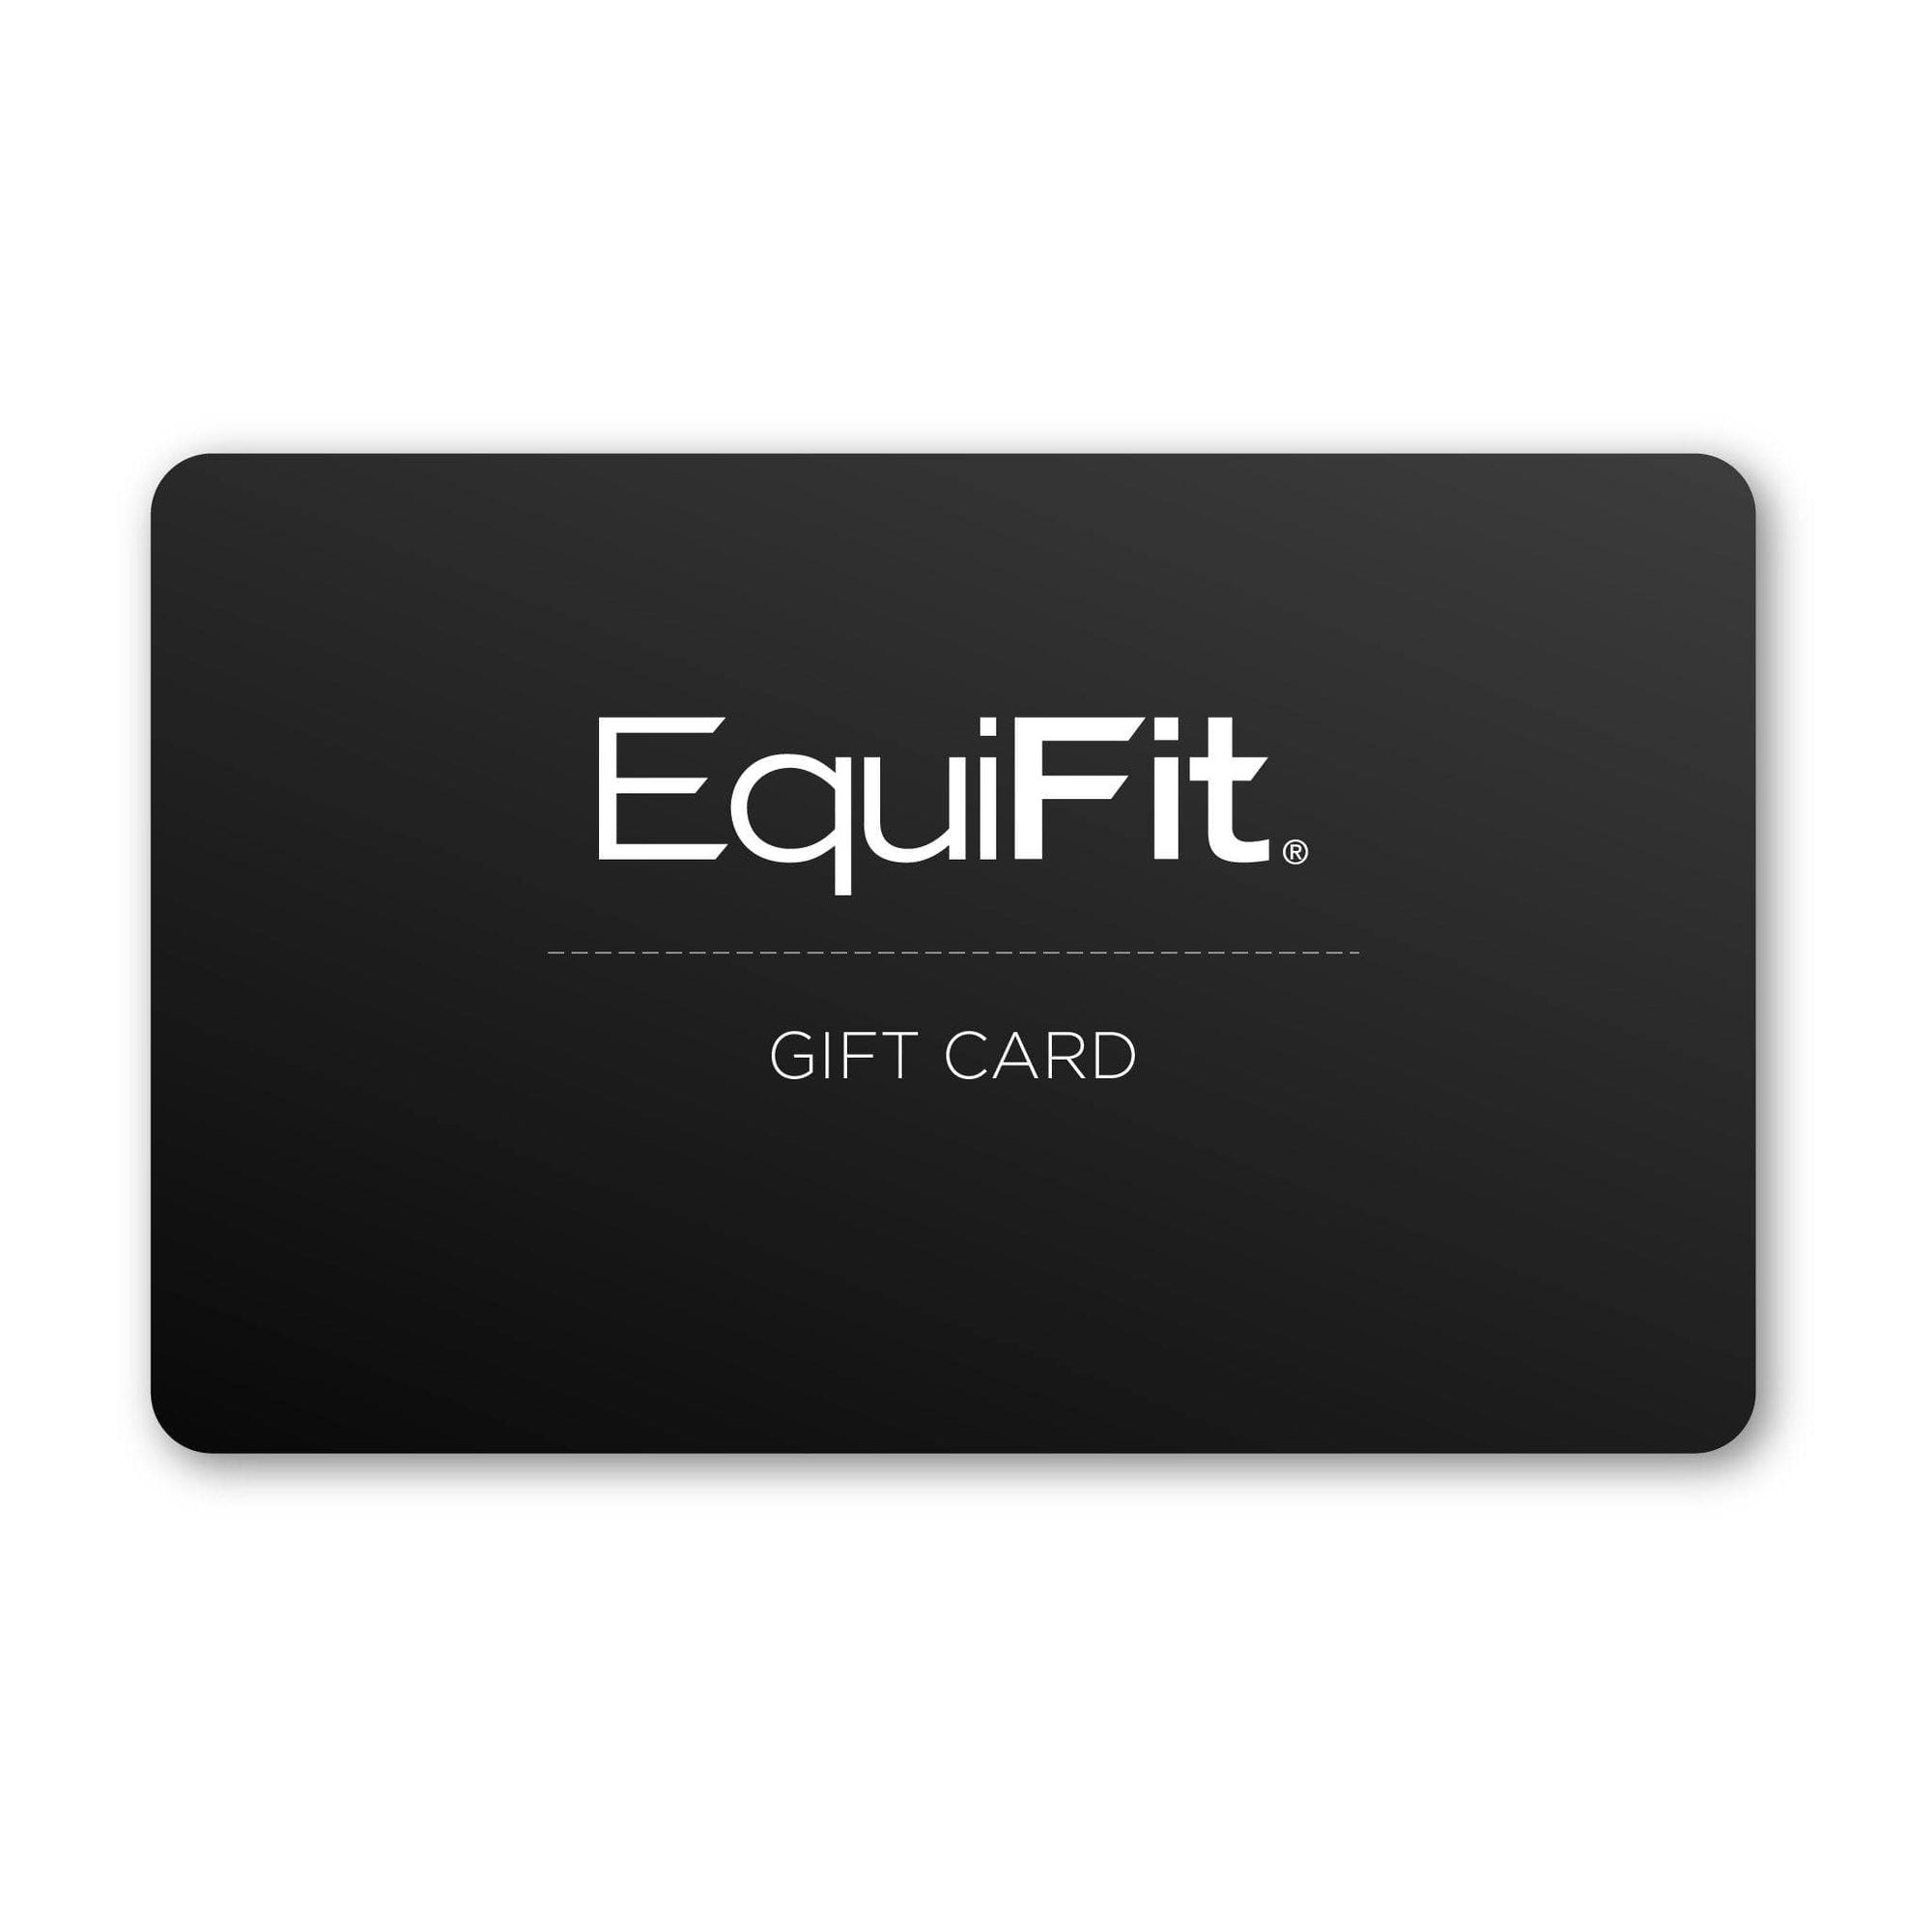 Give them the gift of choice with an EquiFit gift card